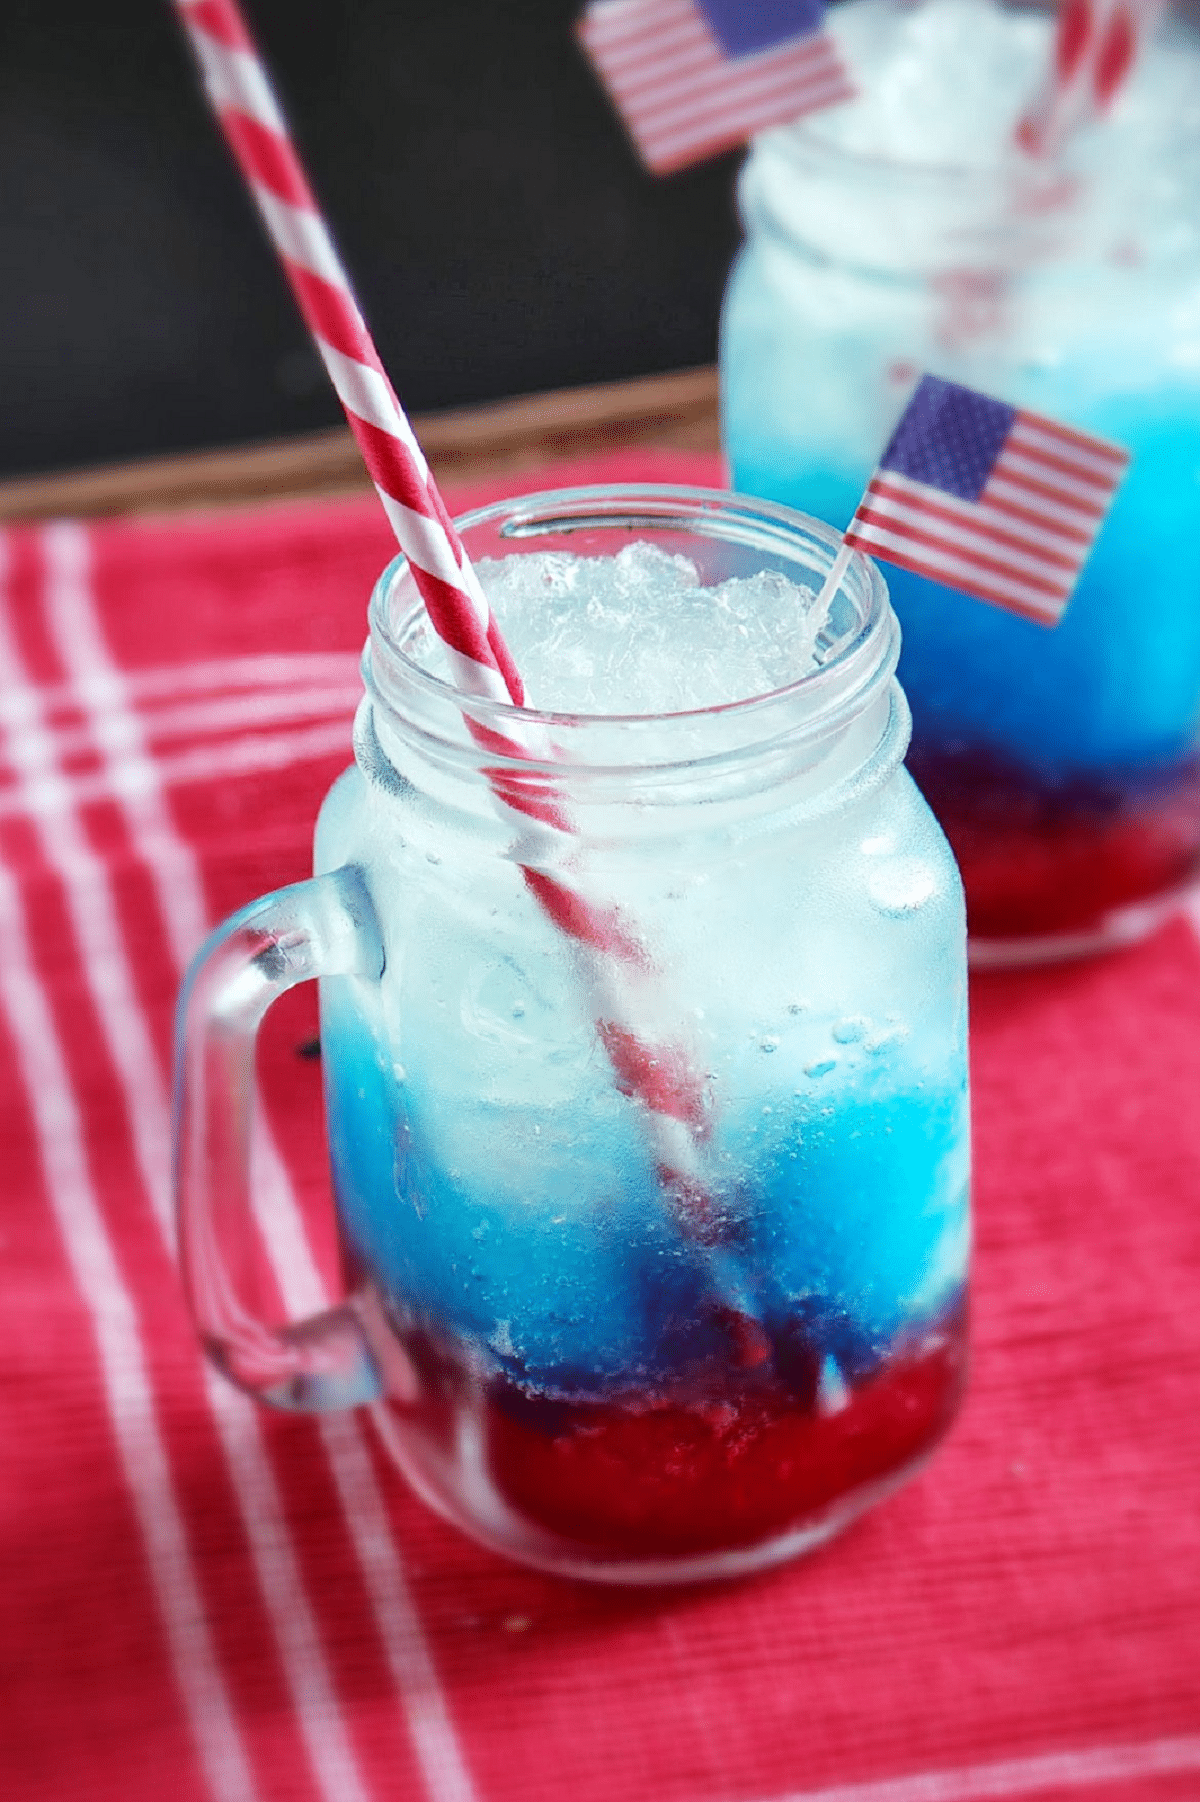 Mason jar mug with red blue and white drink layers and striped straw on red and white striped napkin